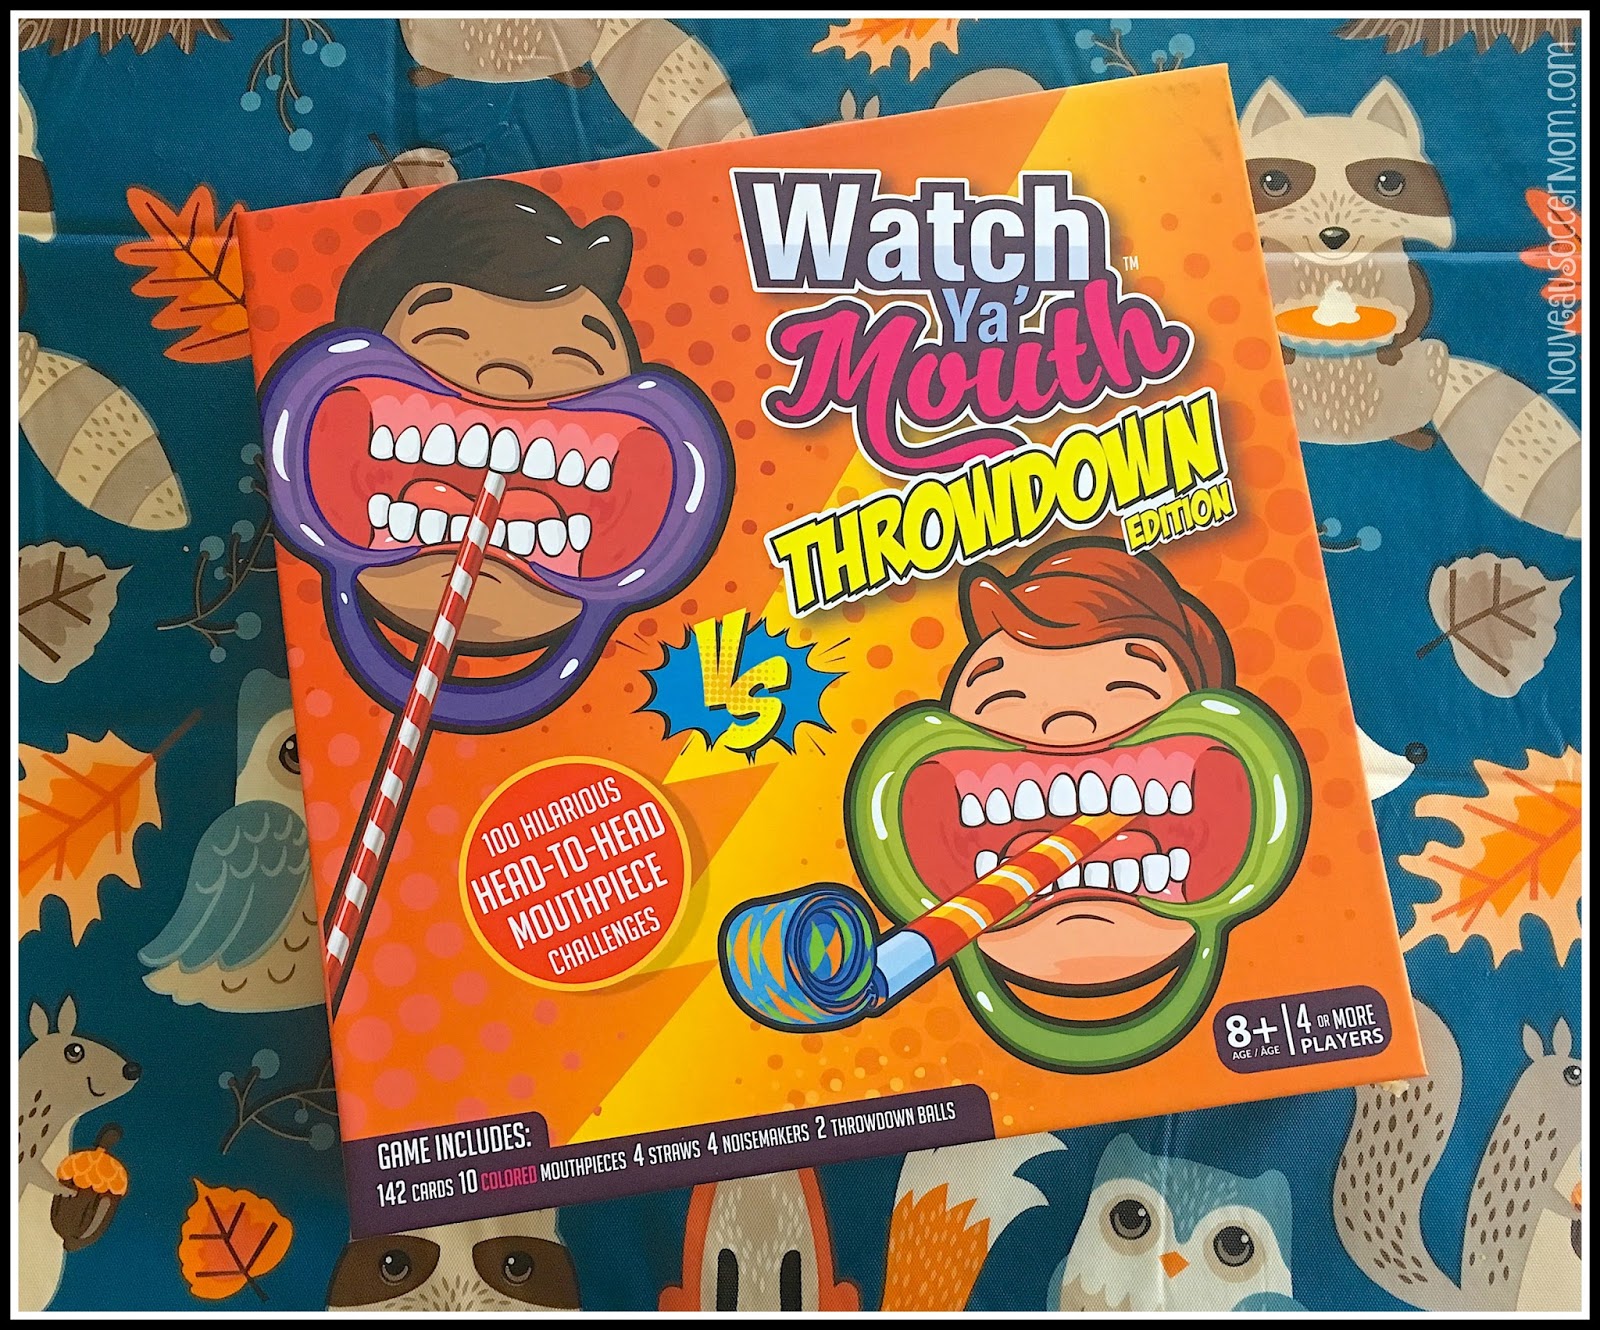 watch-ya-mouth-review-by-shannon-carino-watch-ya-mouth-throwdown-review